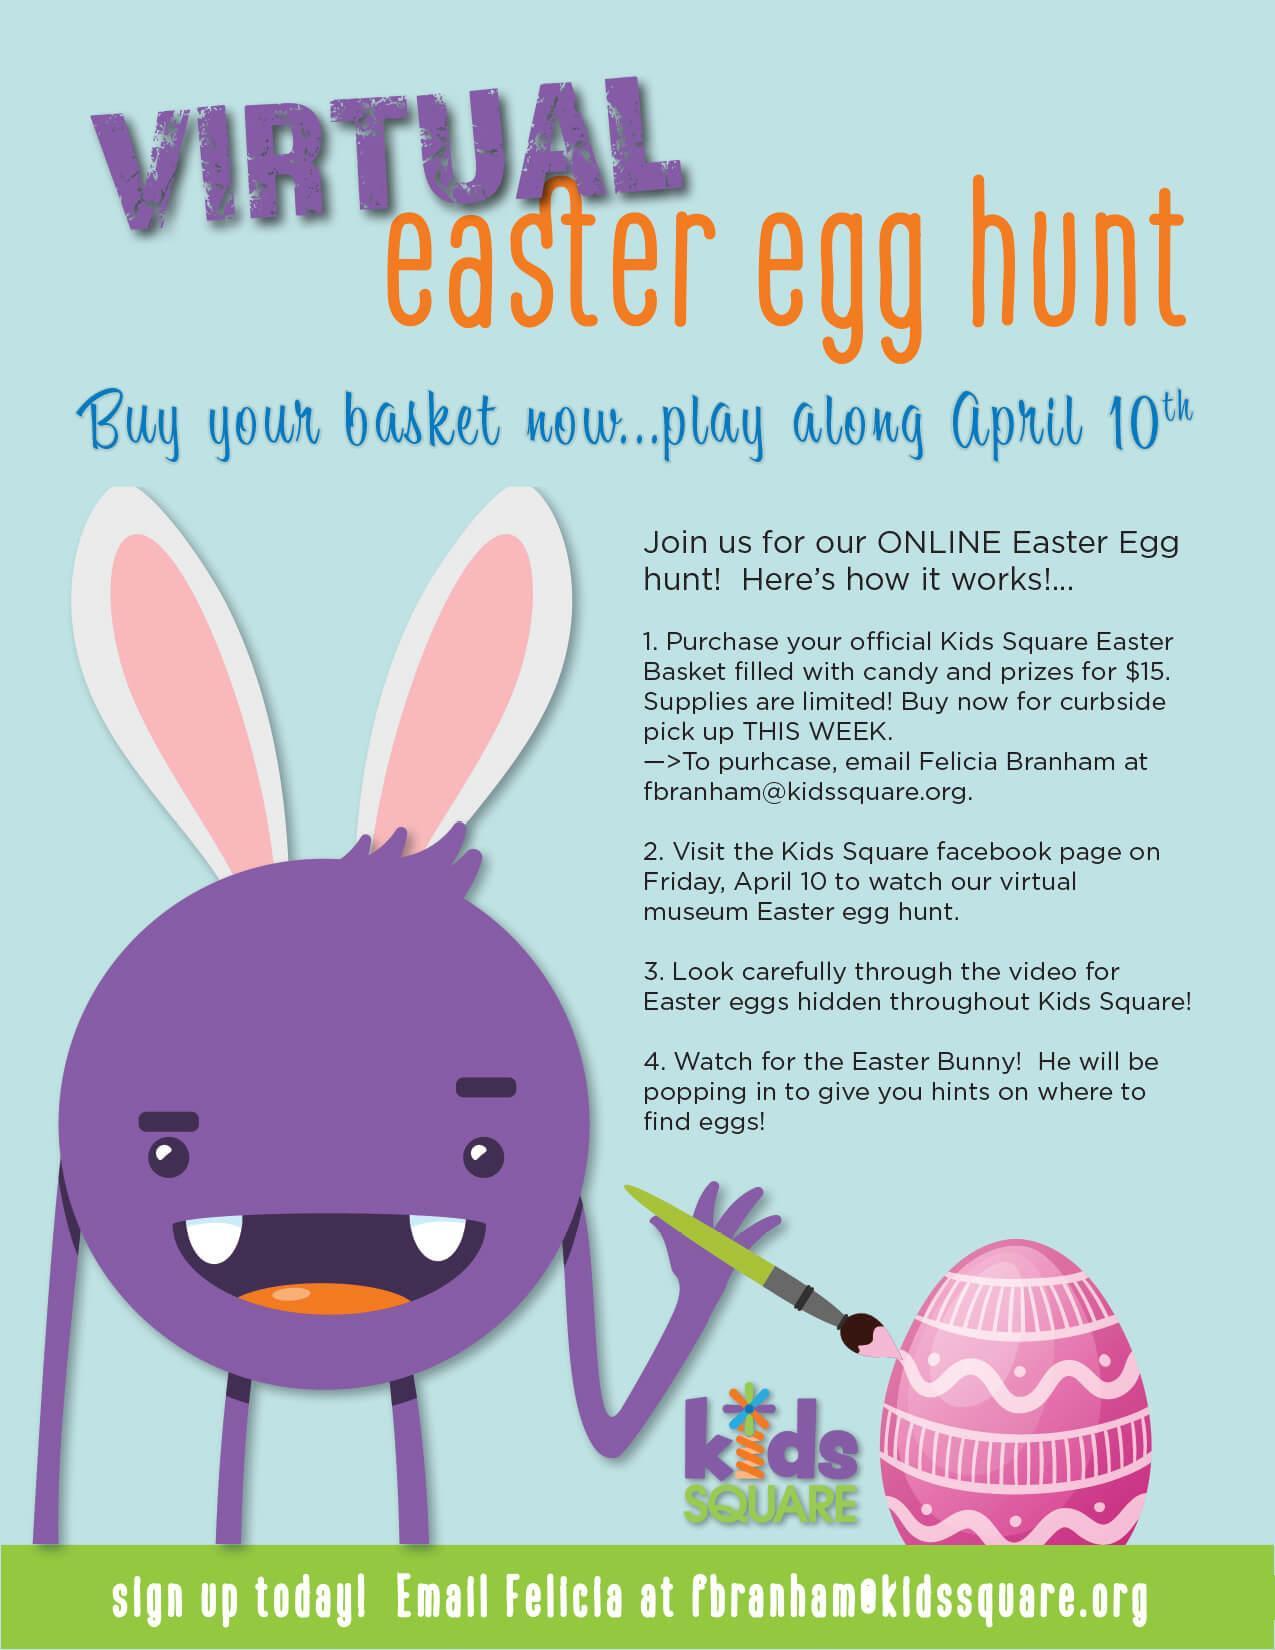 Example of a flyer advertising a virtual easter egg hunt.